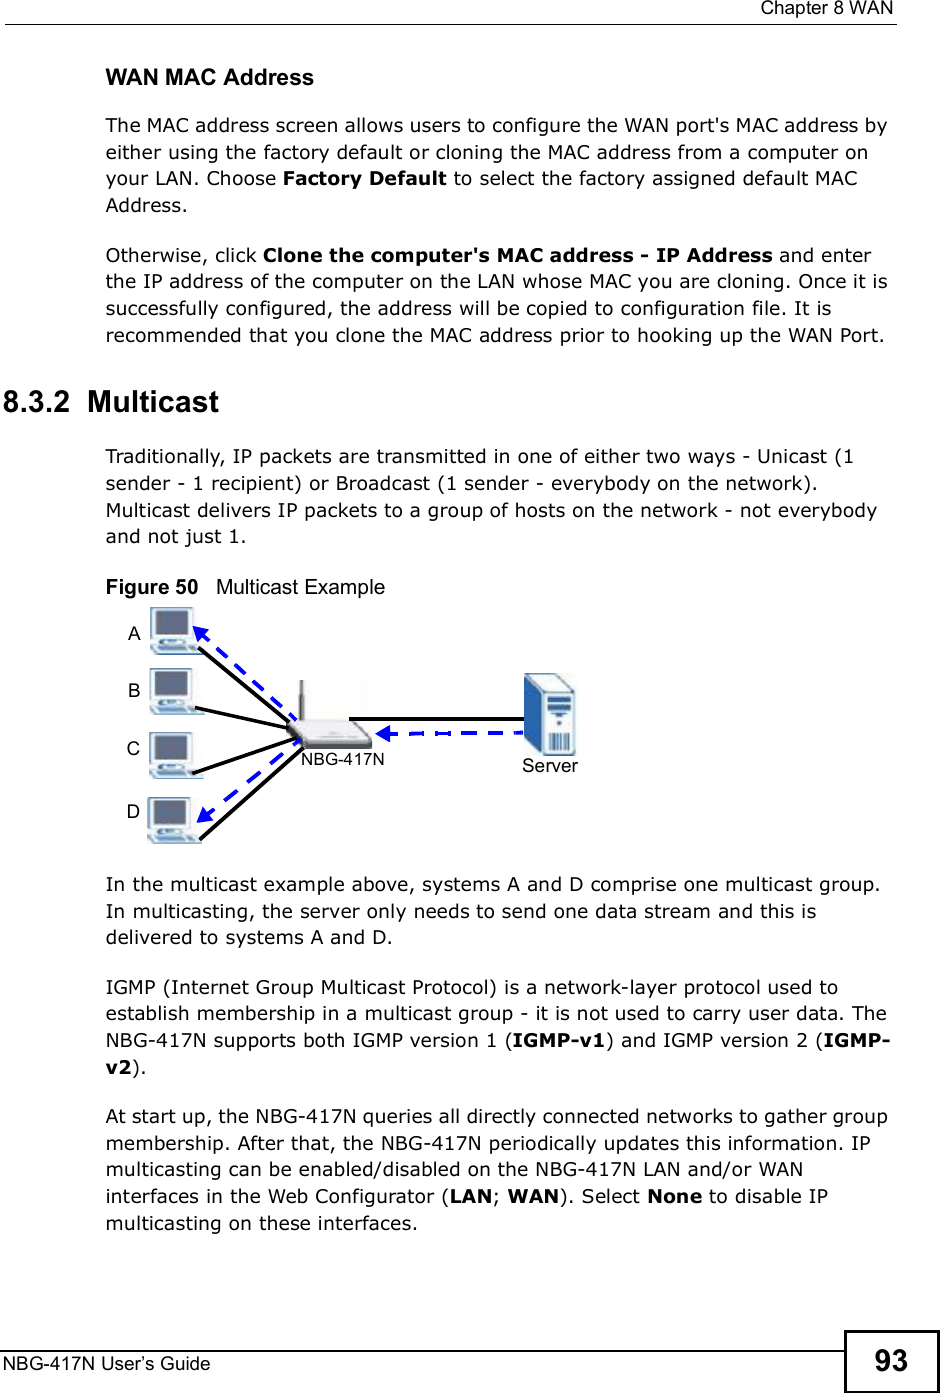  Chapter 8WANNBG-417N User s Guide 93WAN MAC AddressThe MAC address screen allows users to configure the WAN port&apos;s MAC address by either using the factory default or cloning the MAC address from a computer on your LAN. Choose Factory Default to select the factory assigned default MAC Address.Otherwise, click Clone the computer&apos;s MAC address - IP Address and enter the IP address of the computer on the LAN whose MAC you are cloning. Once it is successfully configured, the address will be copied to configuration file. It is recommended that you clone the MAC address prior to hooking up the WAN Port.8.3.2  MulticastTraditionally, IP packets are transmitted in one of either two ways - Unicast (1 sender - 1 recipient) or Broadcast (1 sender - everybody on the network). Multicast delivers IP packets to a group of hosts on the network - not everybody and not just 1. Figure 50   Multicast ExampleIn the multicast example above, systems A and D comprise one multicast group. In multicasting, the server only needs to send one data stream and this is delivered to systems A and D. IGMP (Internet Group Multicast Protocol) is a network-layer protocol used to establish membership in a multicast group - it is not used to carry user data. The NBG-417N supports both IGMP version 1 (IGMP-v1) and IGMP version 2 (IGMP-v2). At start up, the NBG-417N queries all directly connected networks to gather group membership. After that, the NBG-417N periodically updates this information. IP multicasting can be enabled/disabled on the NBG-417N LAN and/or WAN interfaces in the Web Configurator (LAN; WAN). Select None to disable IP multicasting on these interfaces.ServerNBG-417NABCD